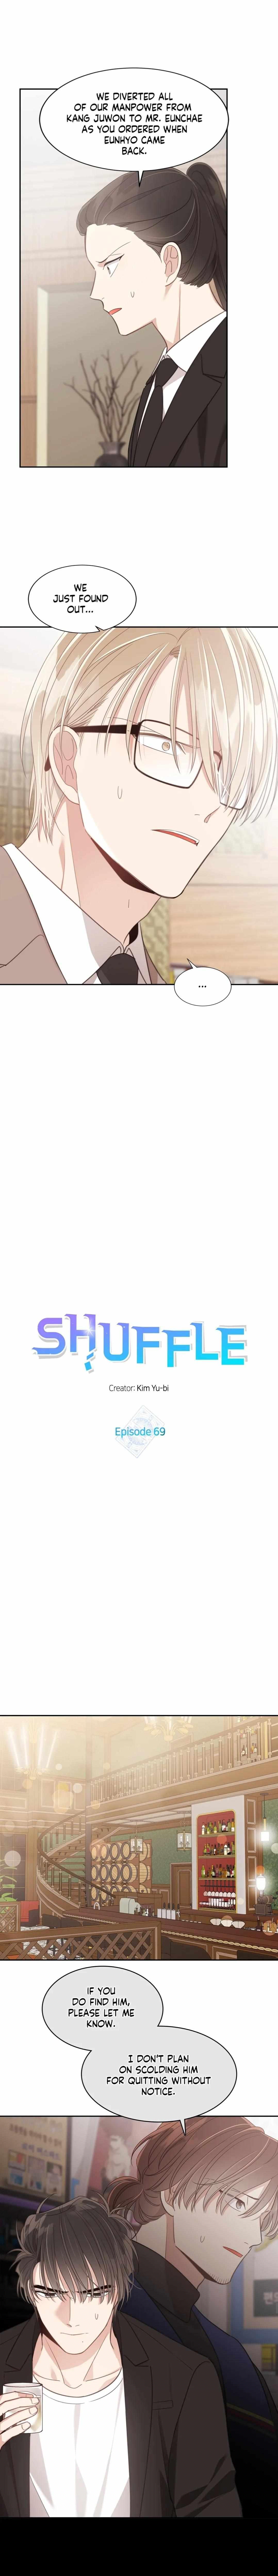 Shuffle! - Days In The Bloom - episode 70 - 6